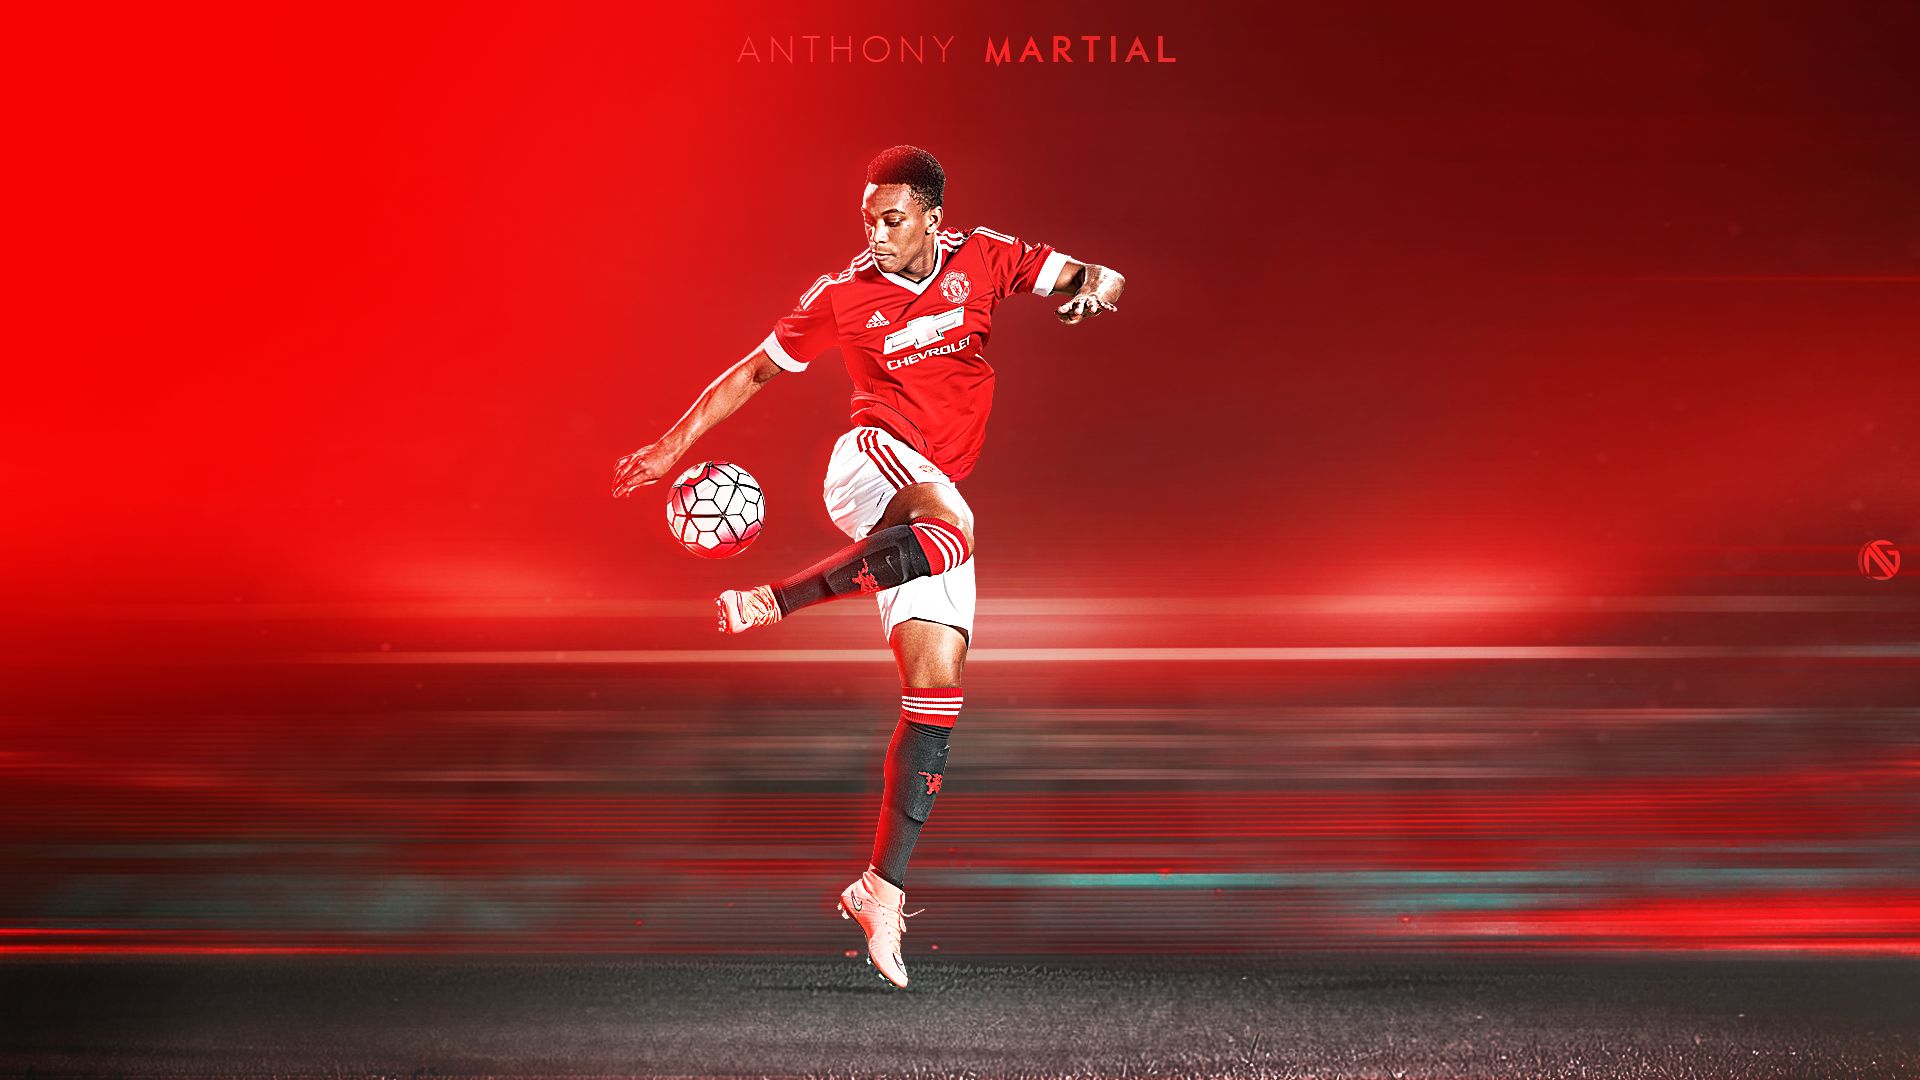 Anthony Martial Wallpapers - Wallpaper Cave